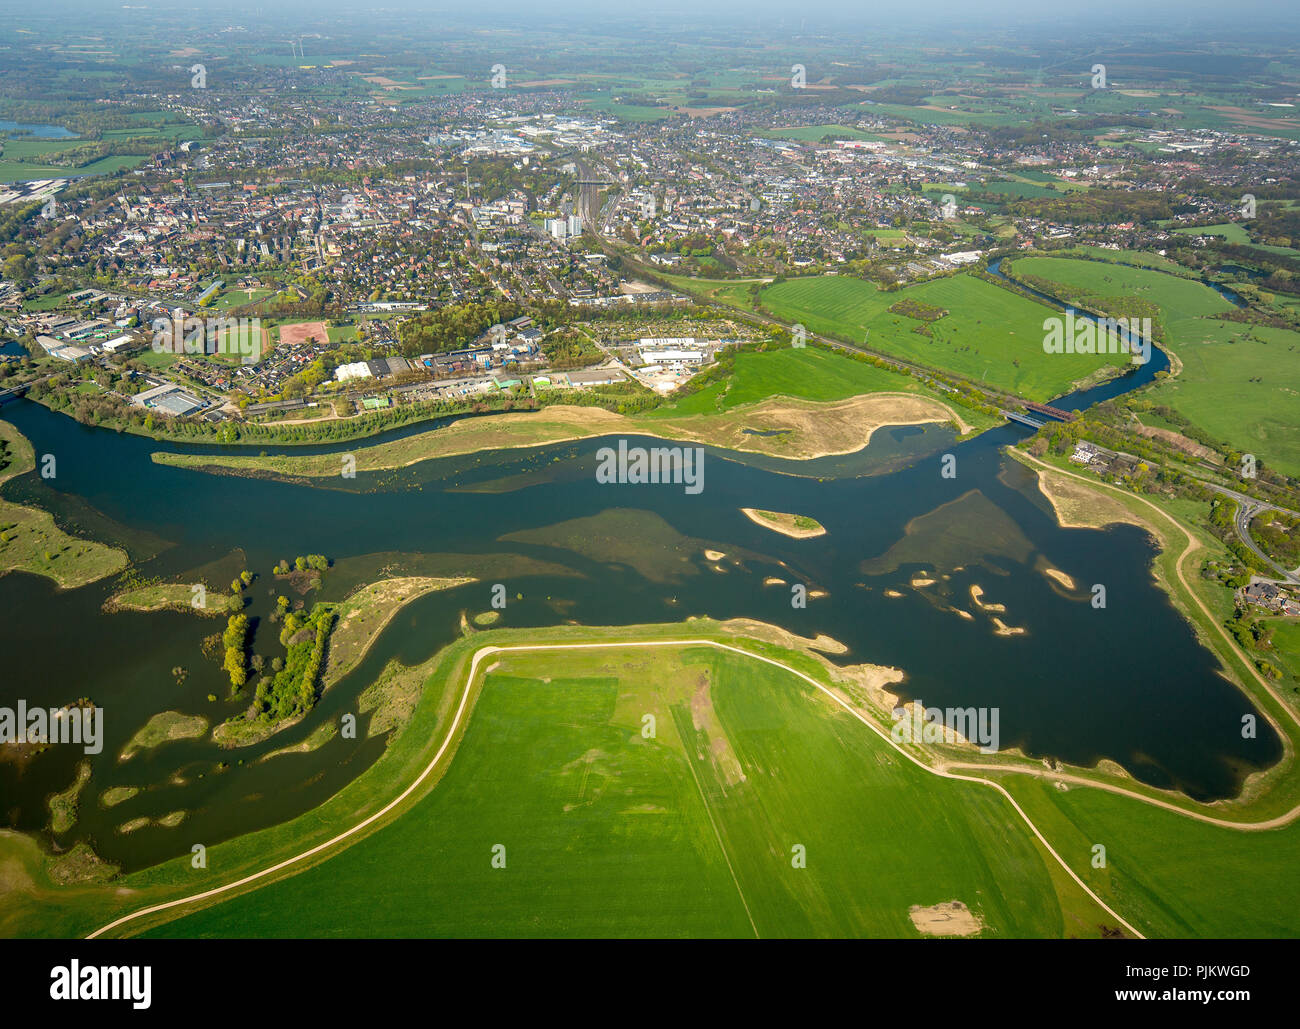 Lippe estuary in Rhine, reconstruction, nature conservation, flooding areas, Lippeverband, Wesel, Ruhr area, North Rhine-Westphalia, Germany Stock Photo